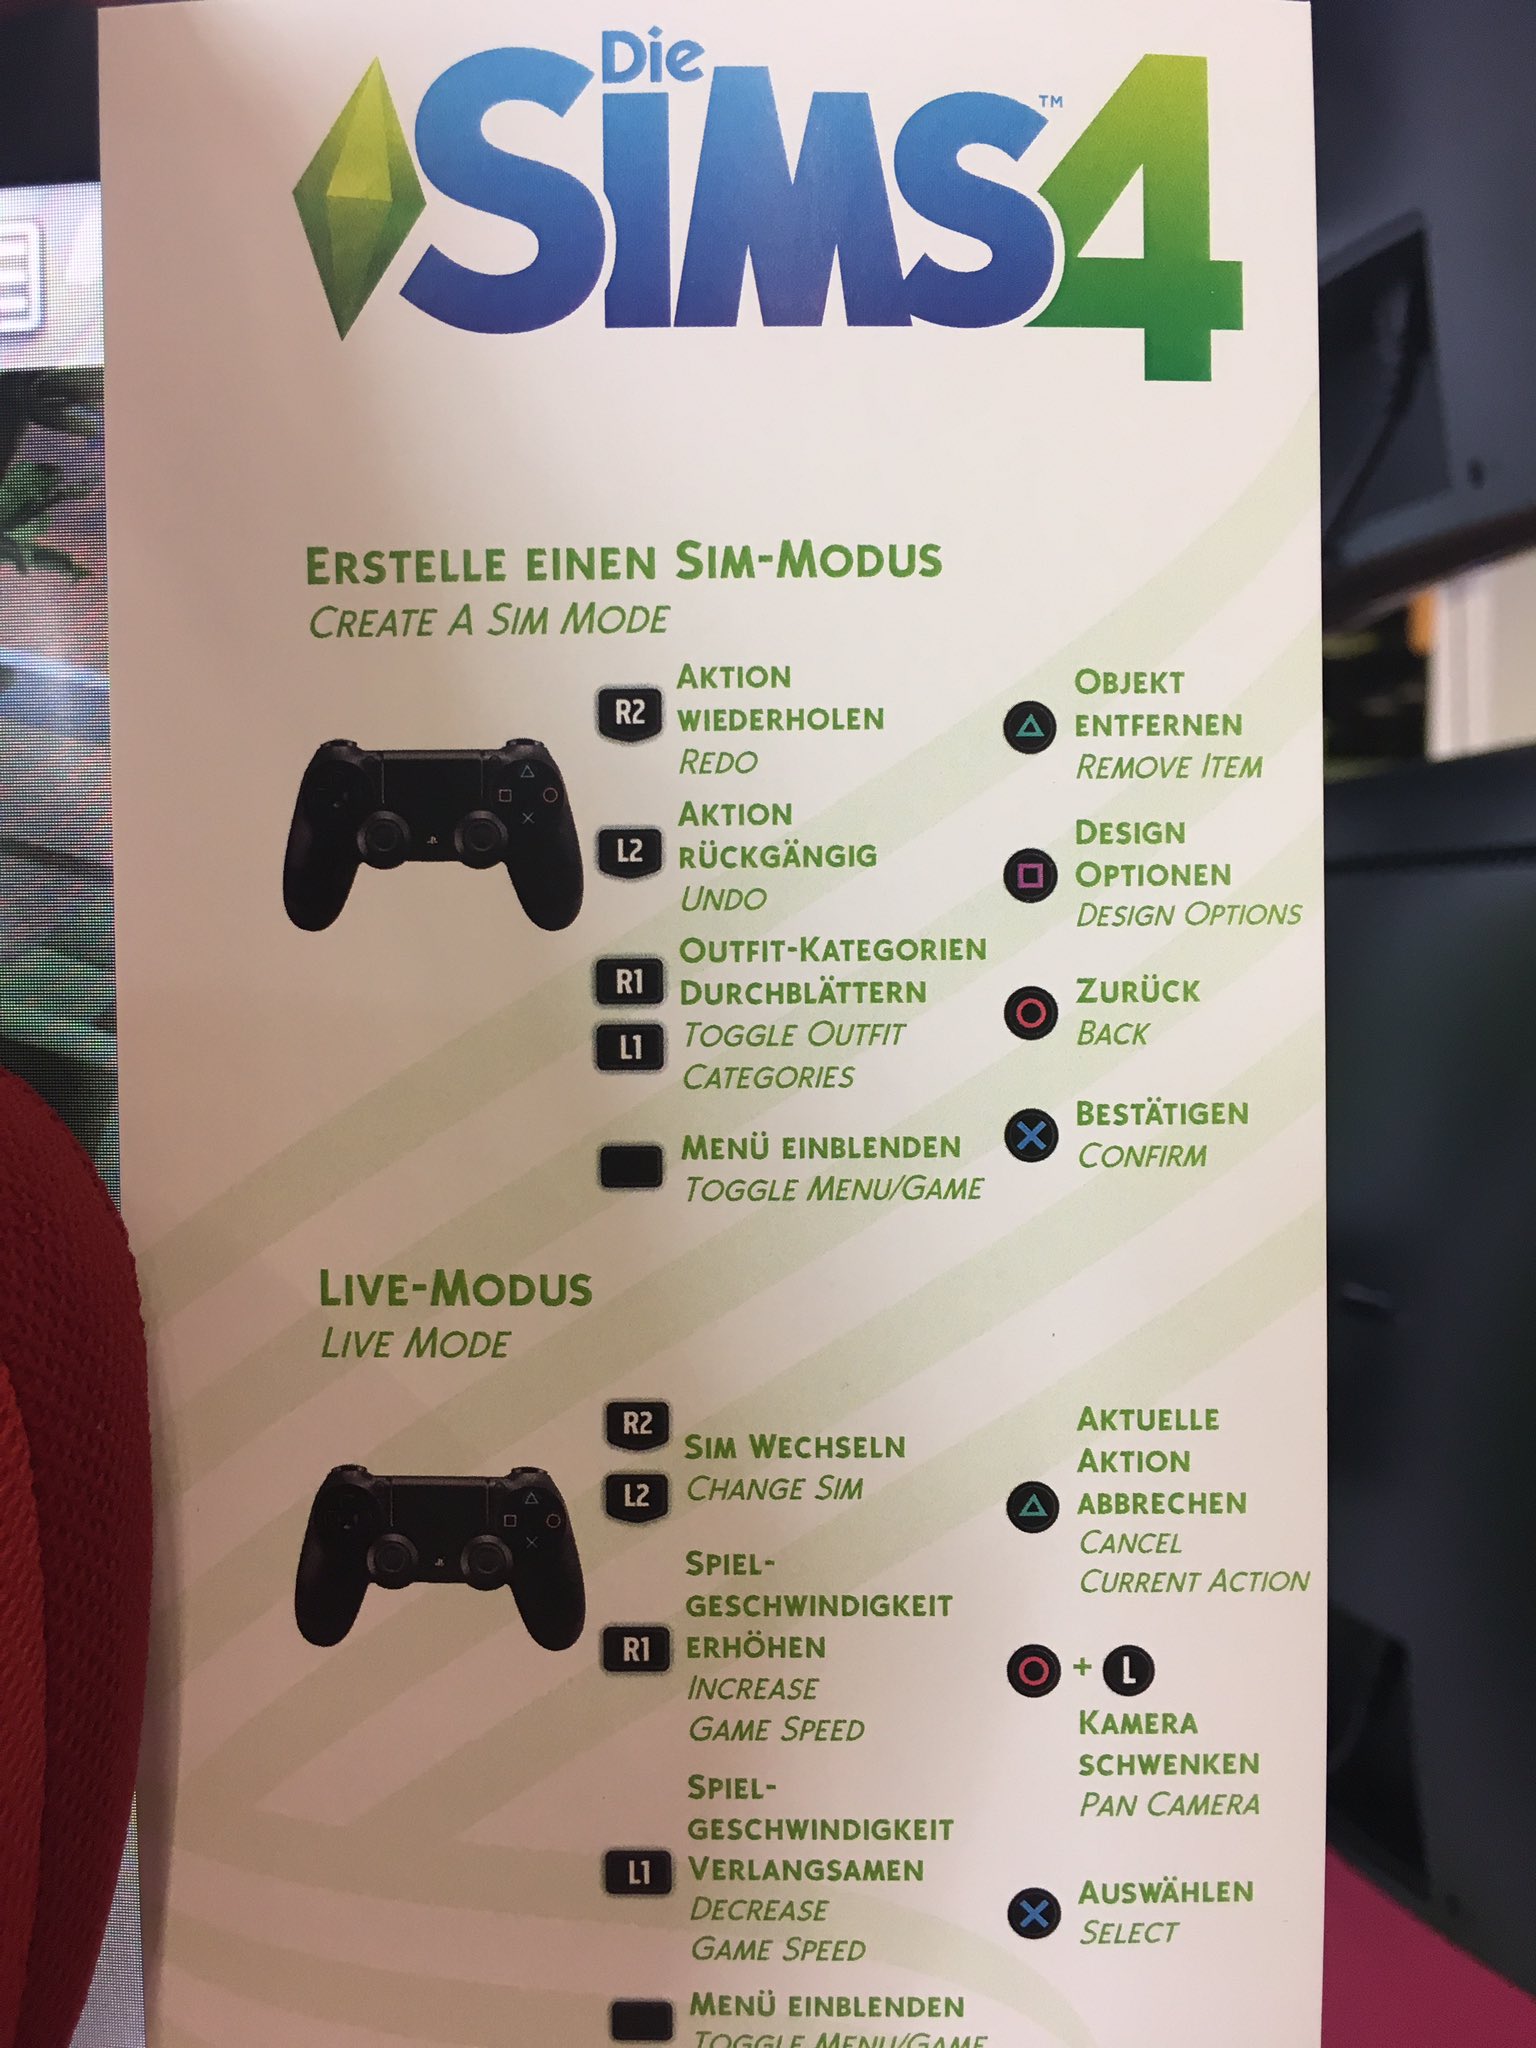 How to CHEAT on The Sims 4 on PS4 